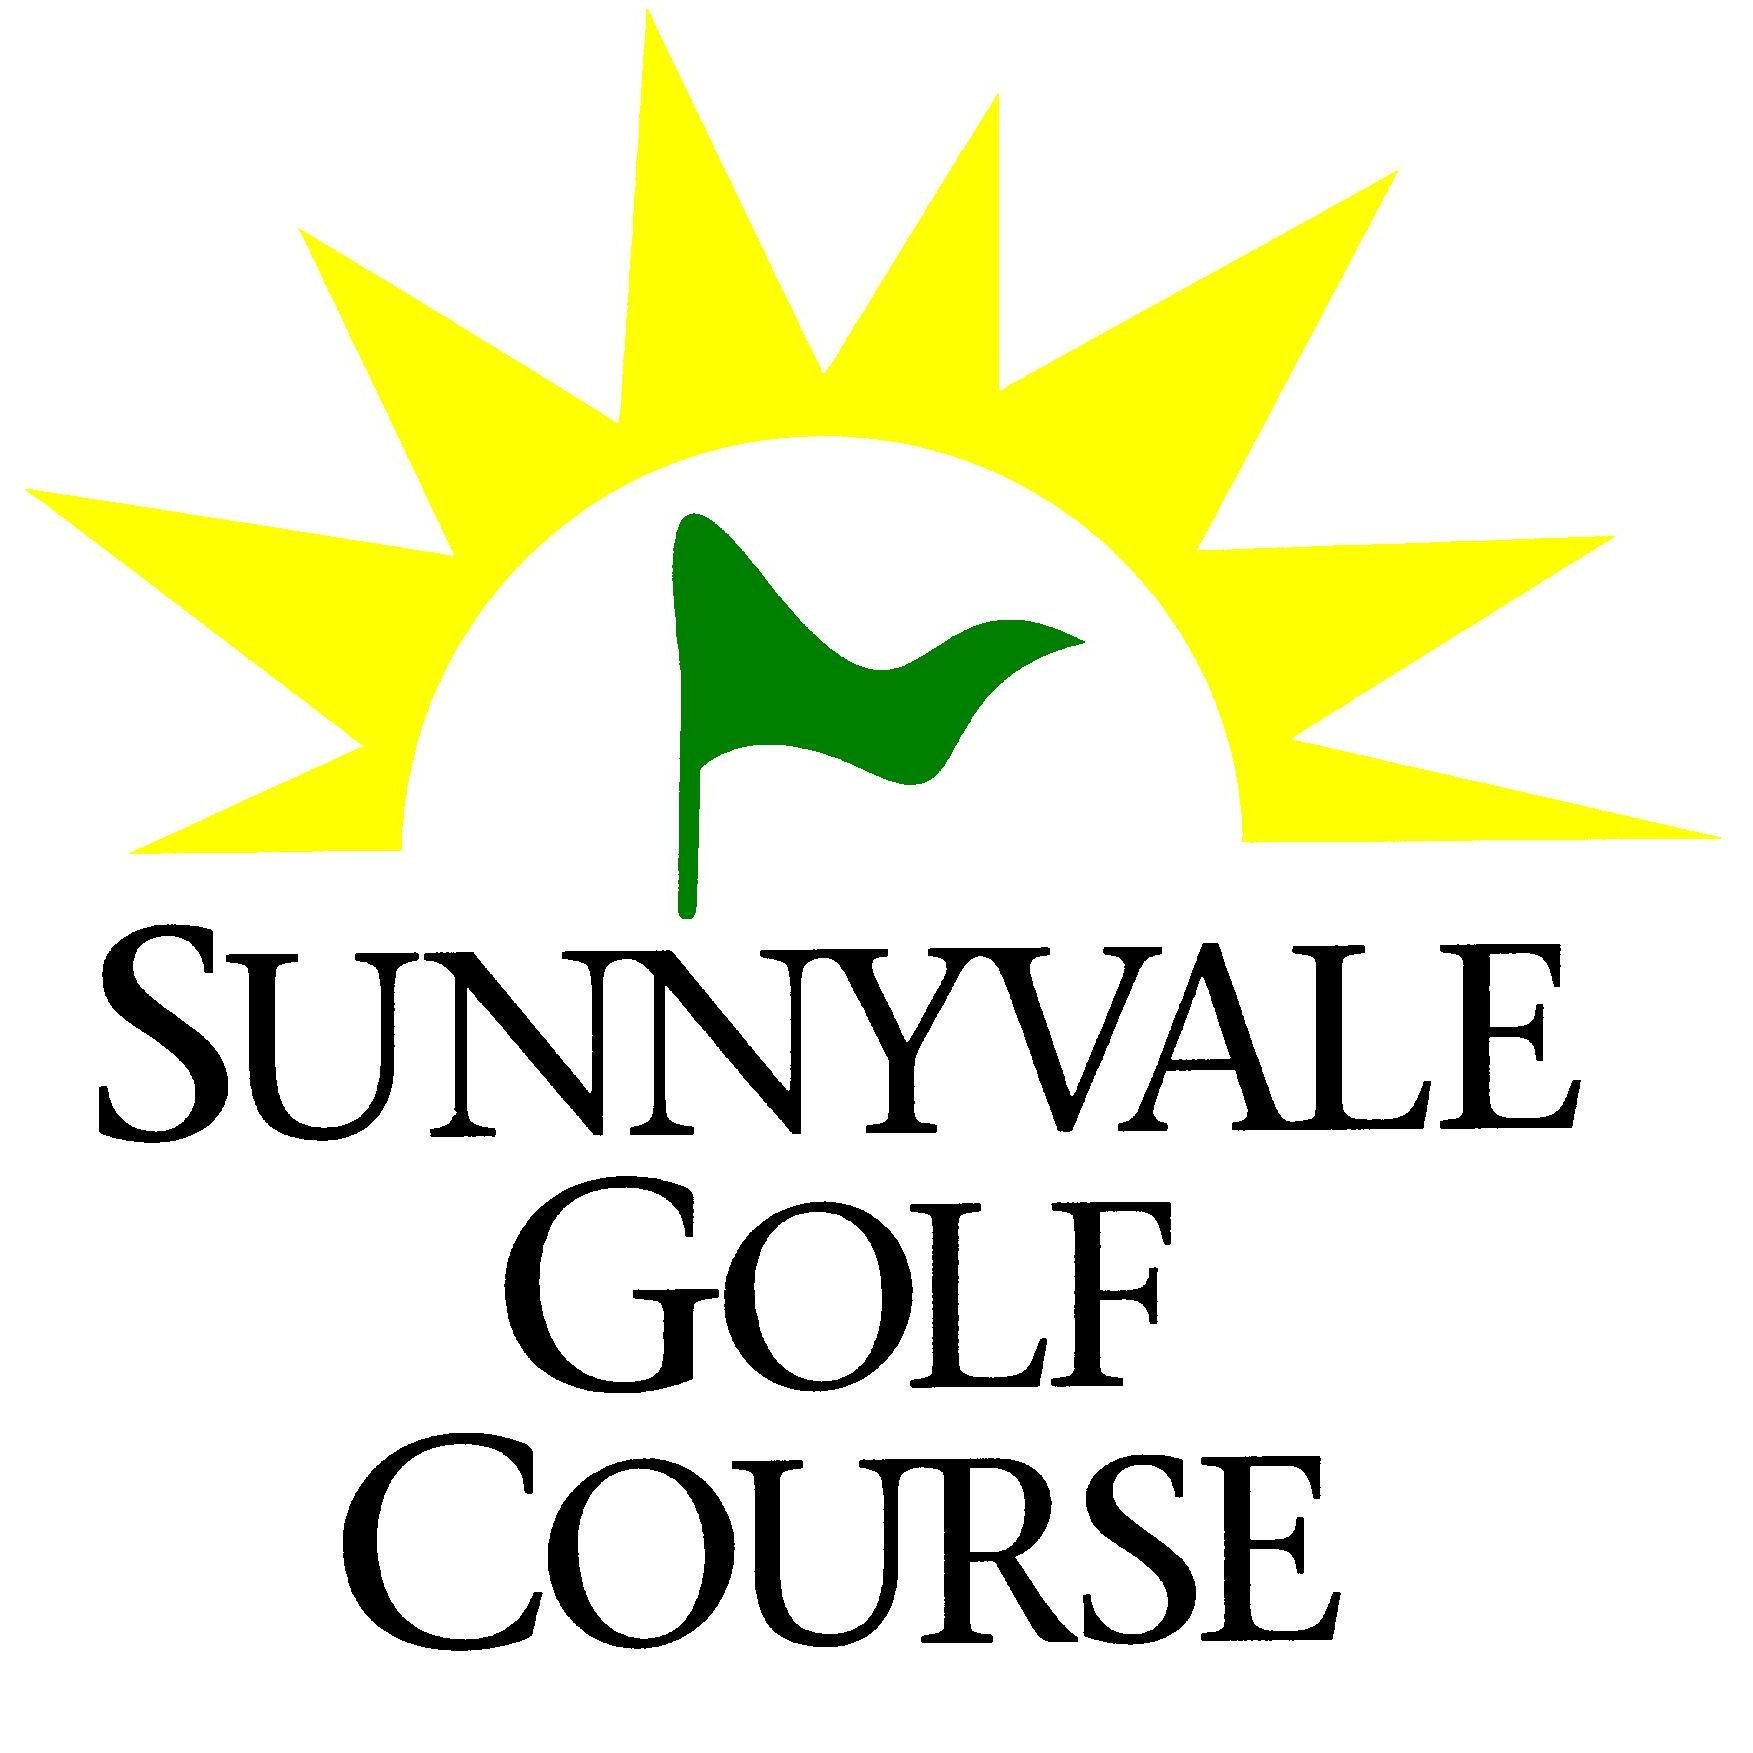 Official Twitter for Sunnyvale Municipal Golf Course

http://t.co/OA7K4Jvcxy
http://t.co/F132vcyFw5